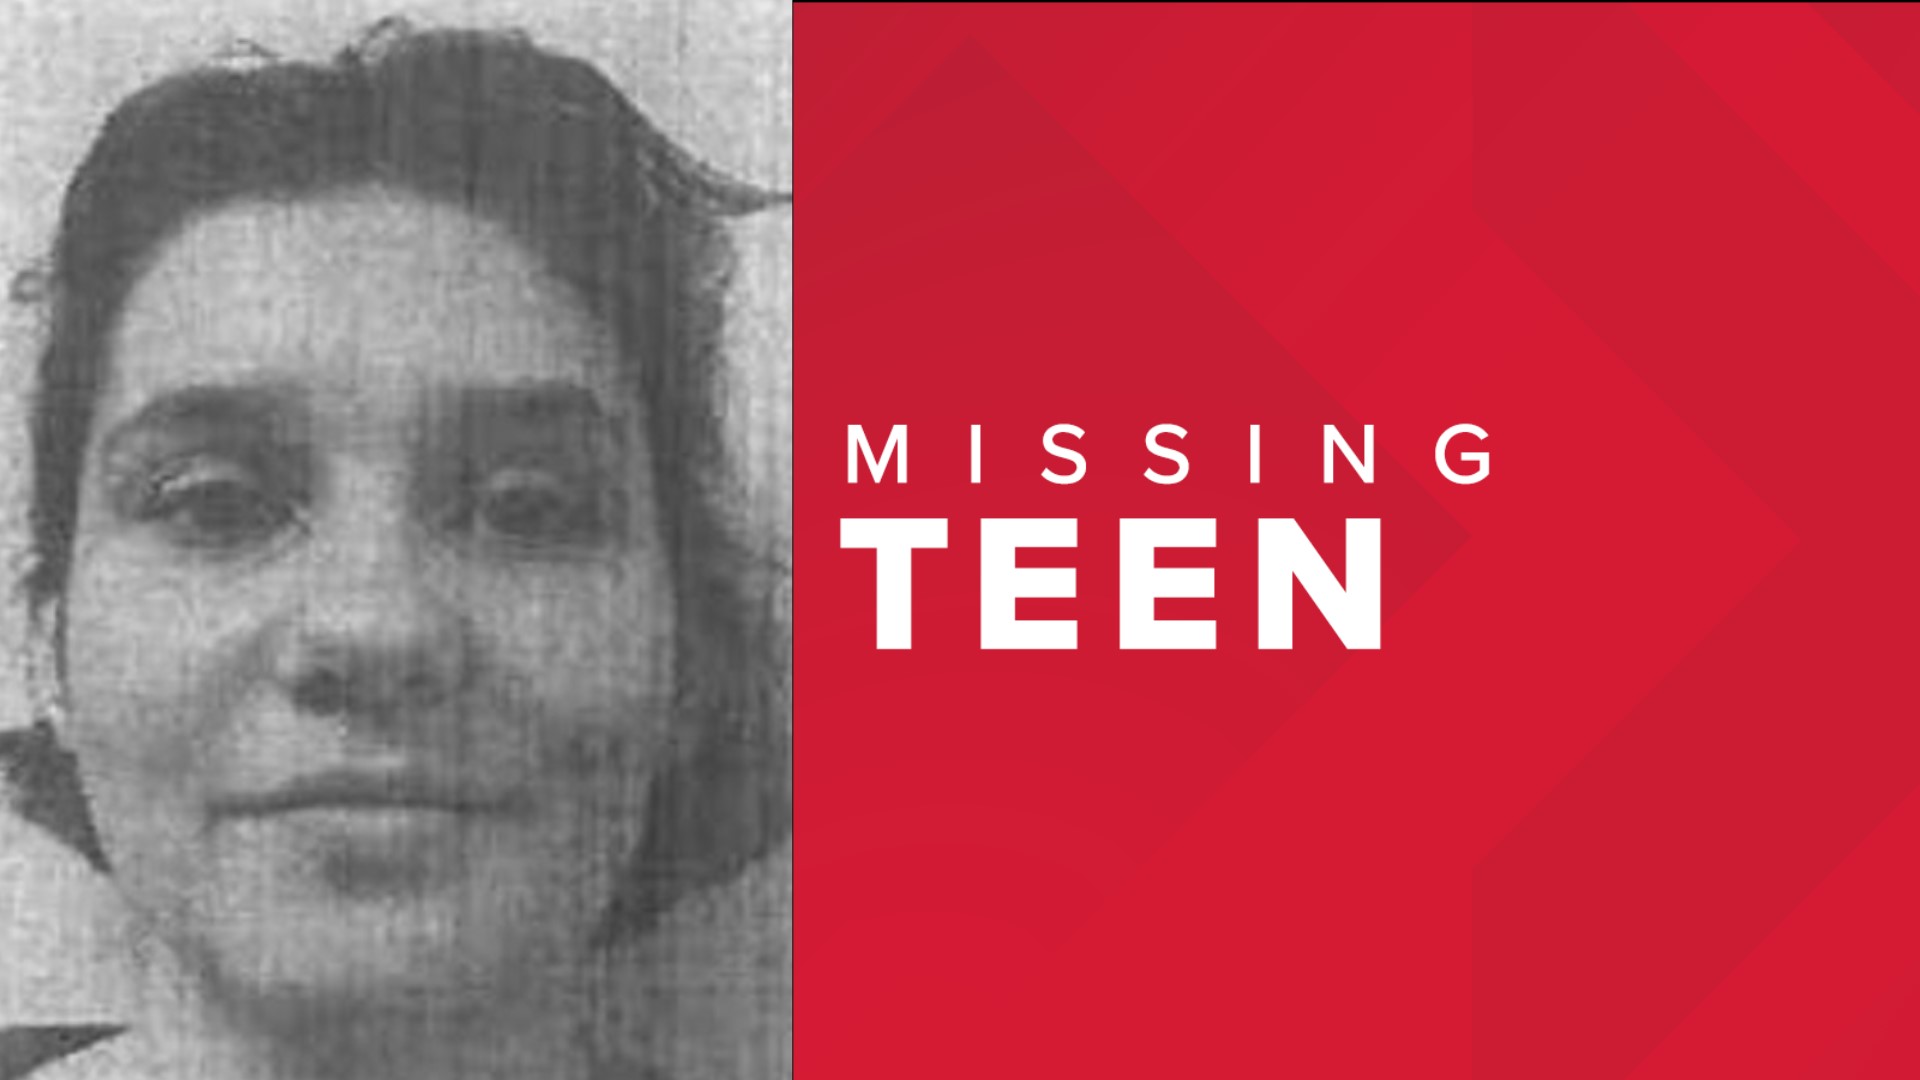 Austin Gail Hinsey, 15, was last seen Thursday, Aug. 4 in Wabash. She is believed to be in extreme danger and may require medical assistance.